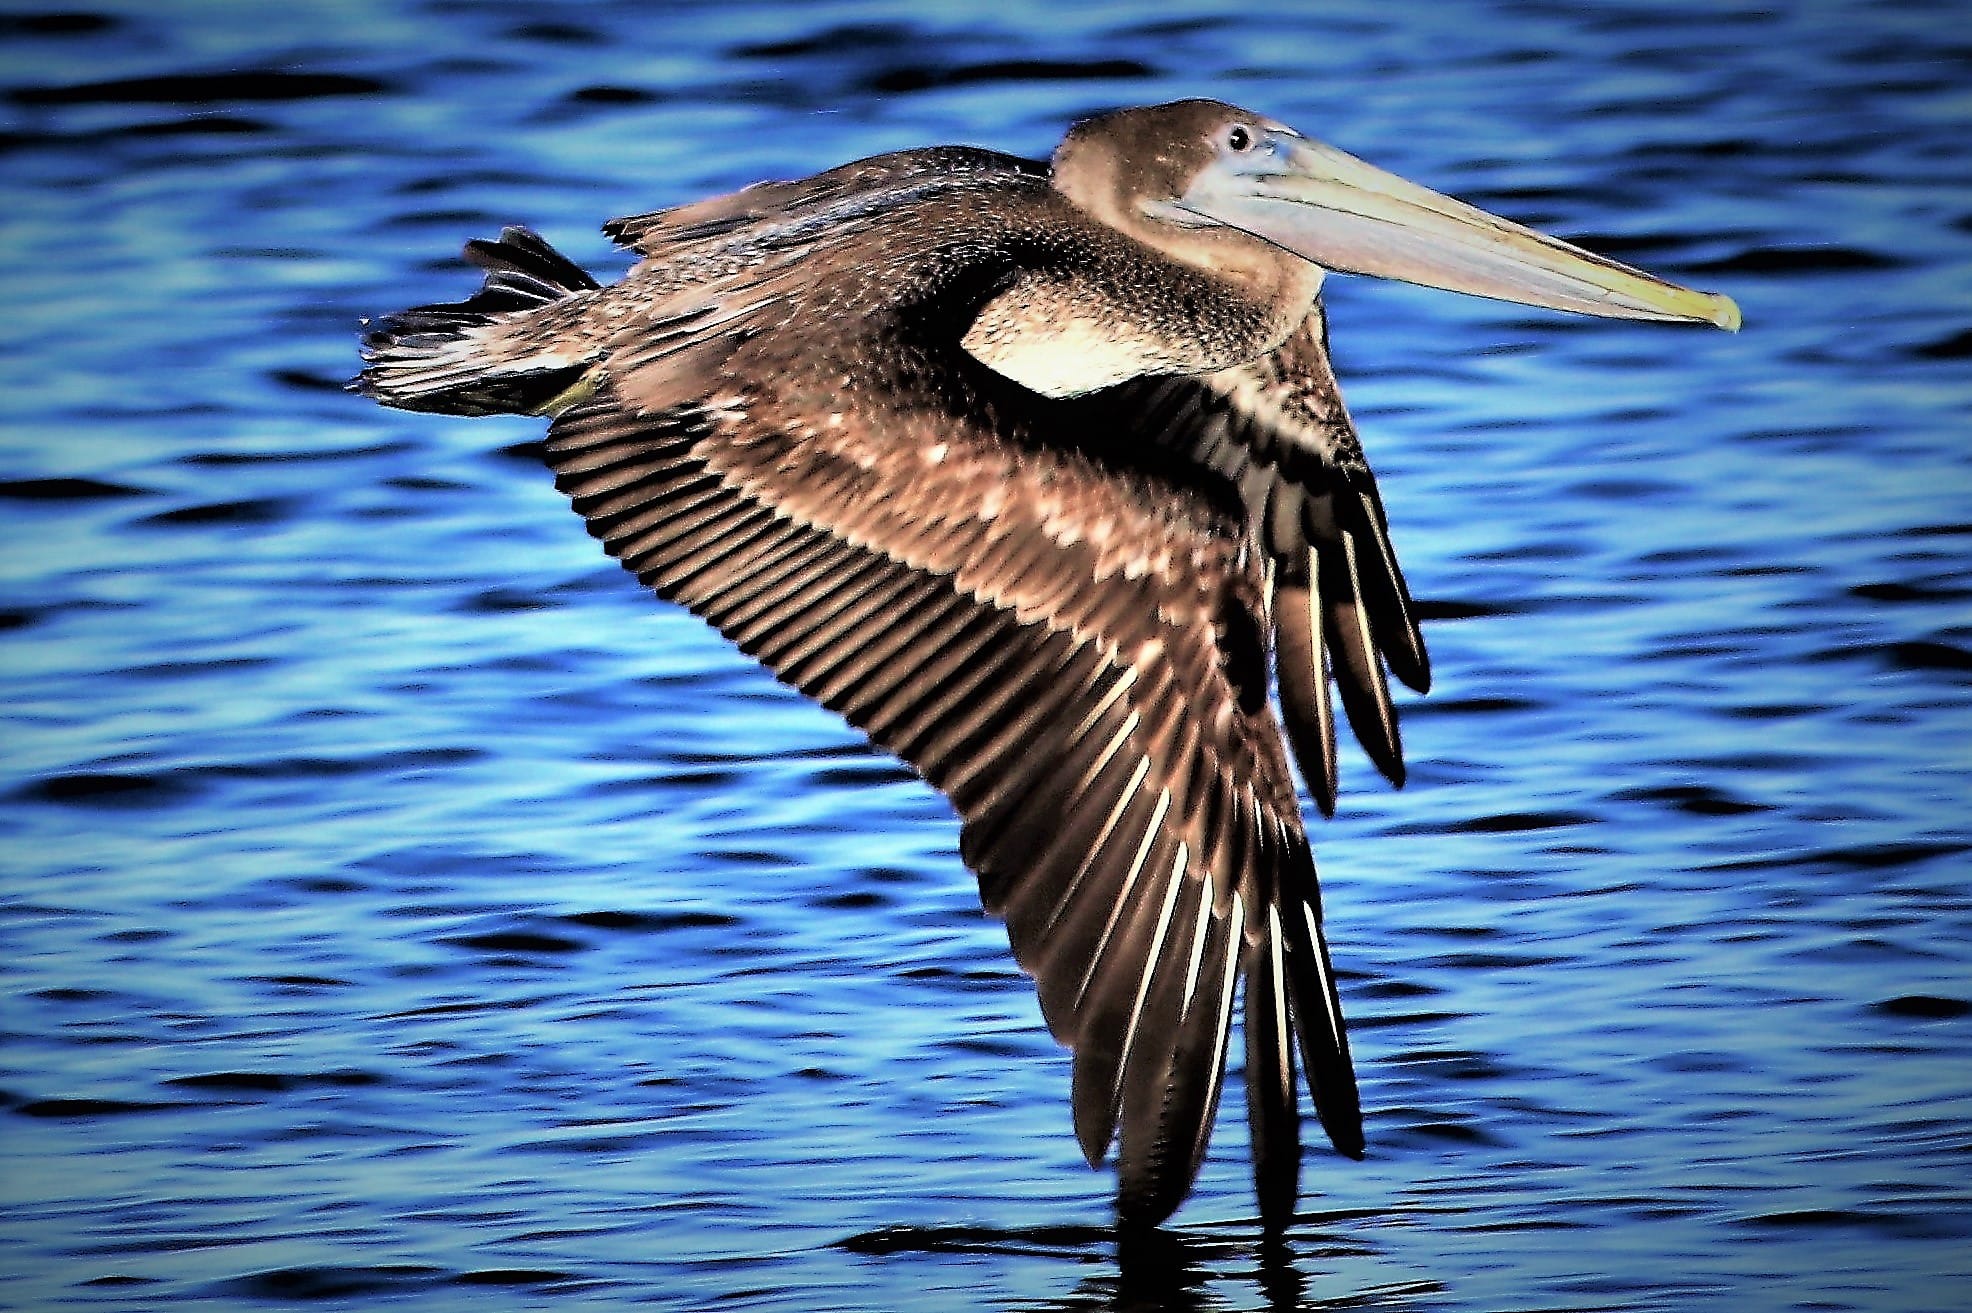 A pelican in flight over the water